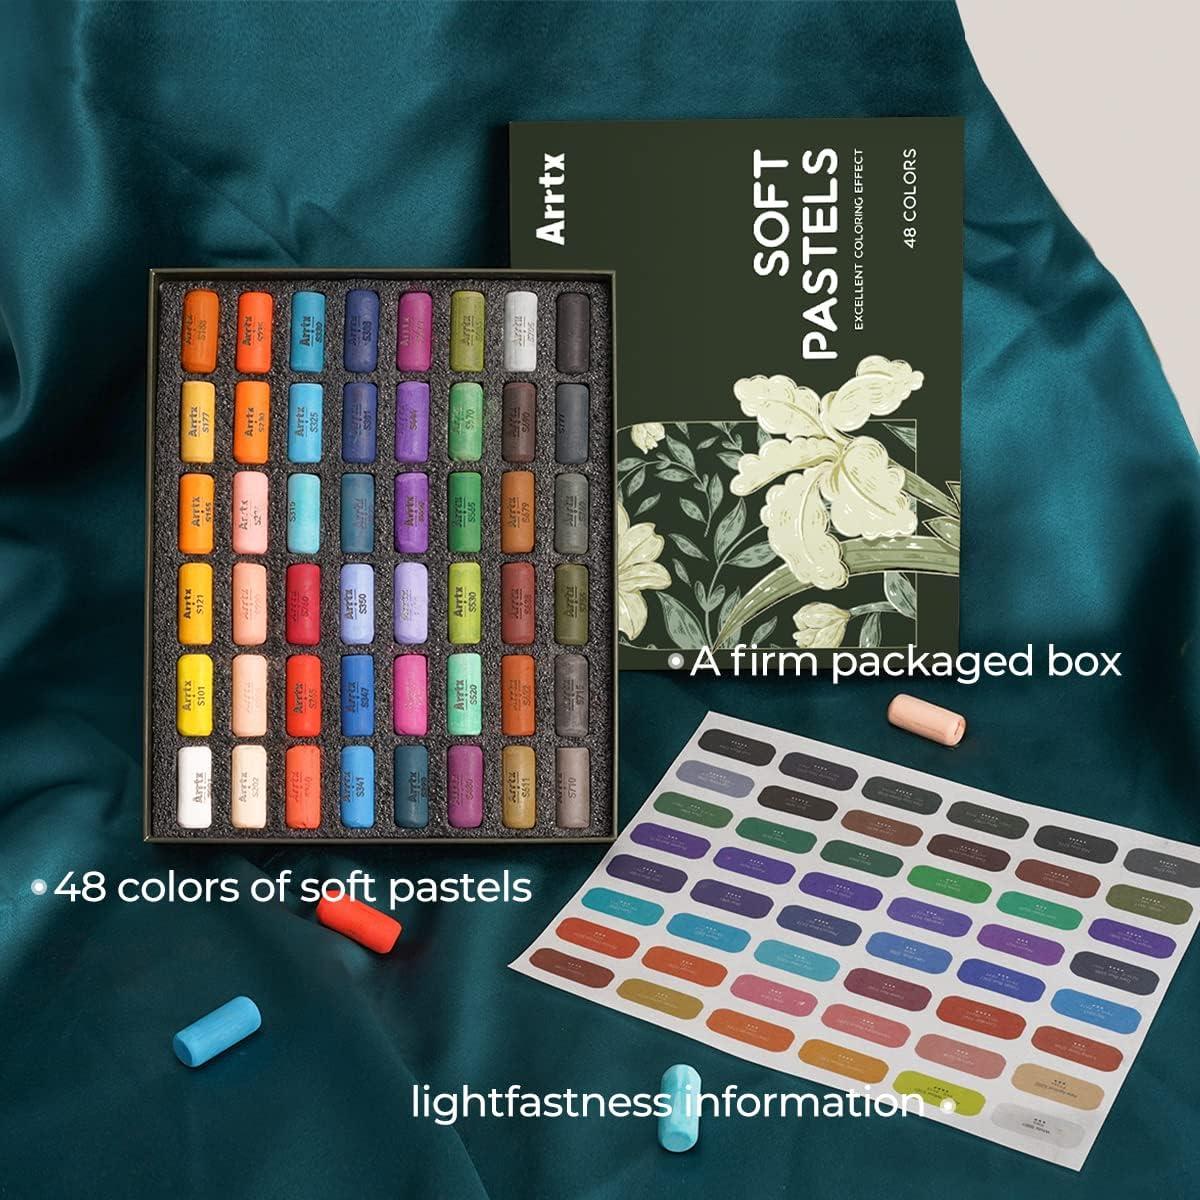 Arrtx Soft Pastels Art Supplies, 48 Assorted Colors Chalk Pastels Creamy  Soft and High Adhesion for Artist Beginners Traditional Art Creation